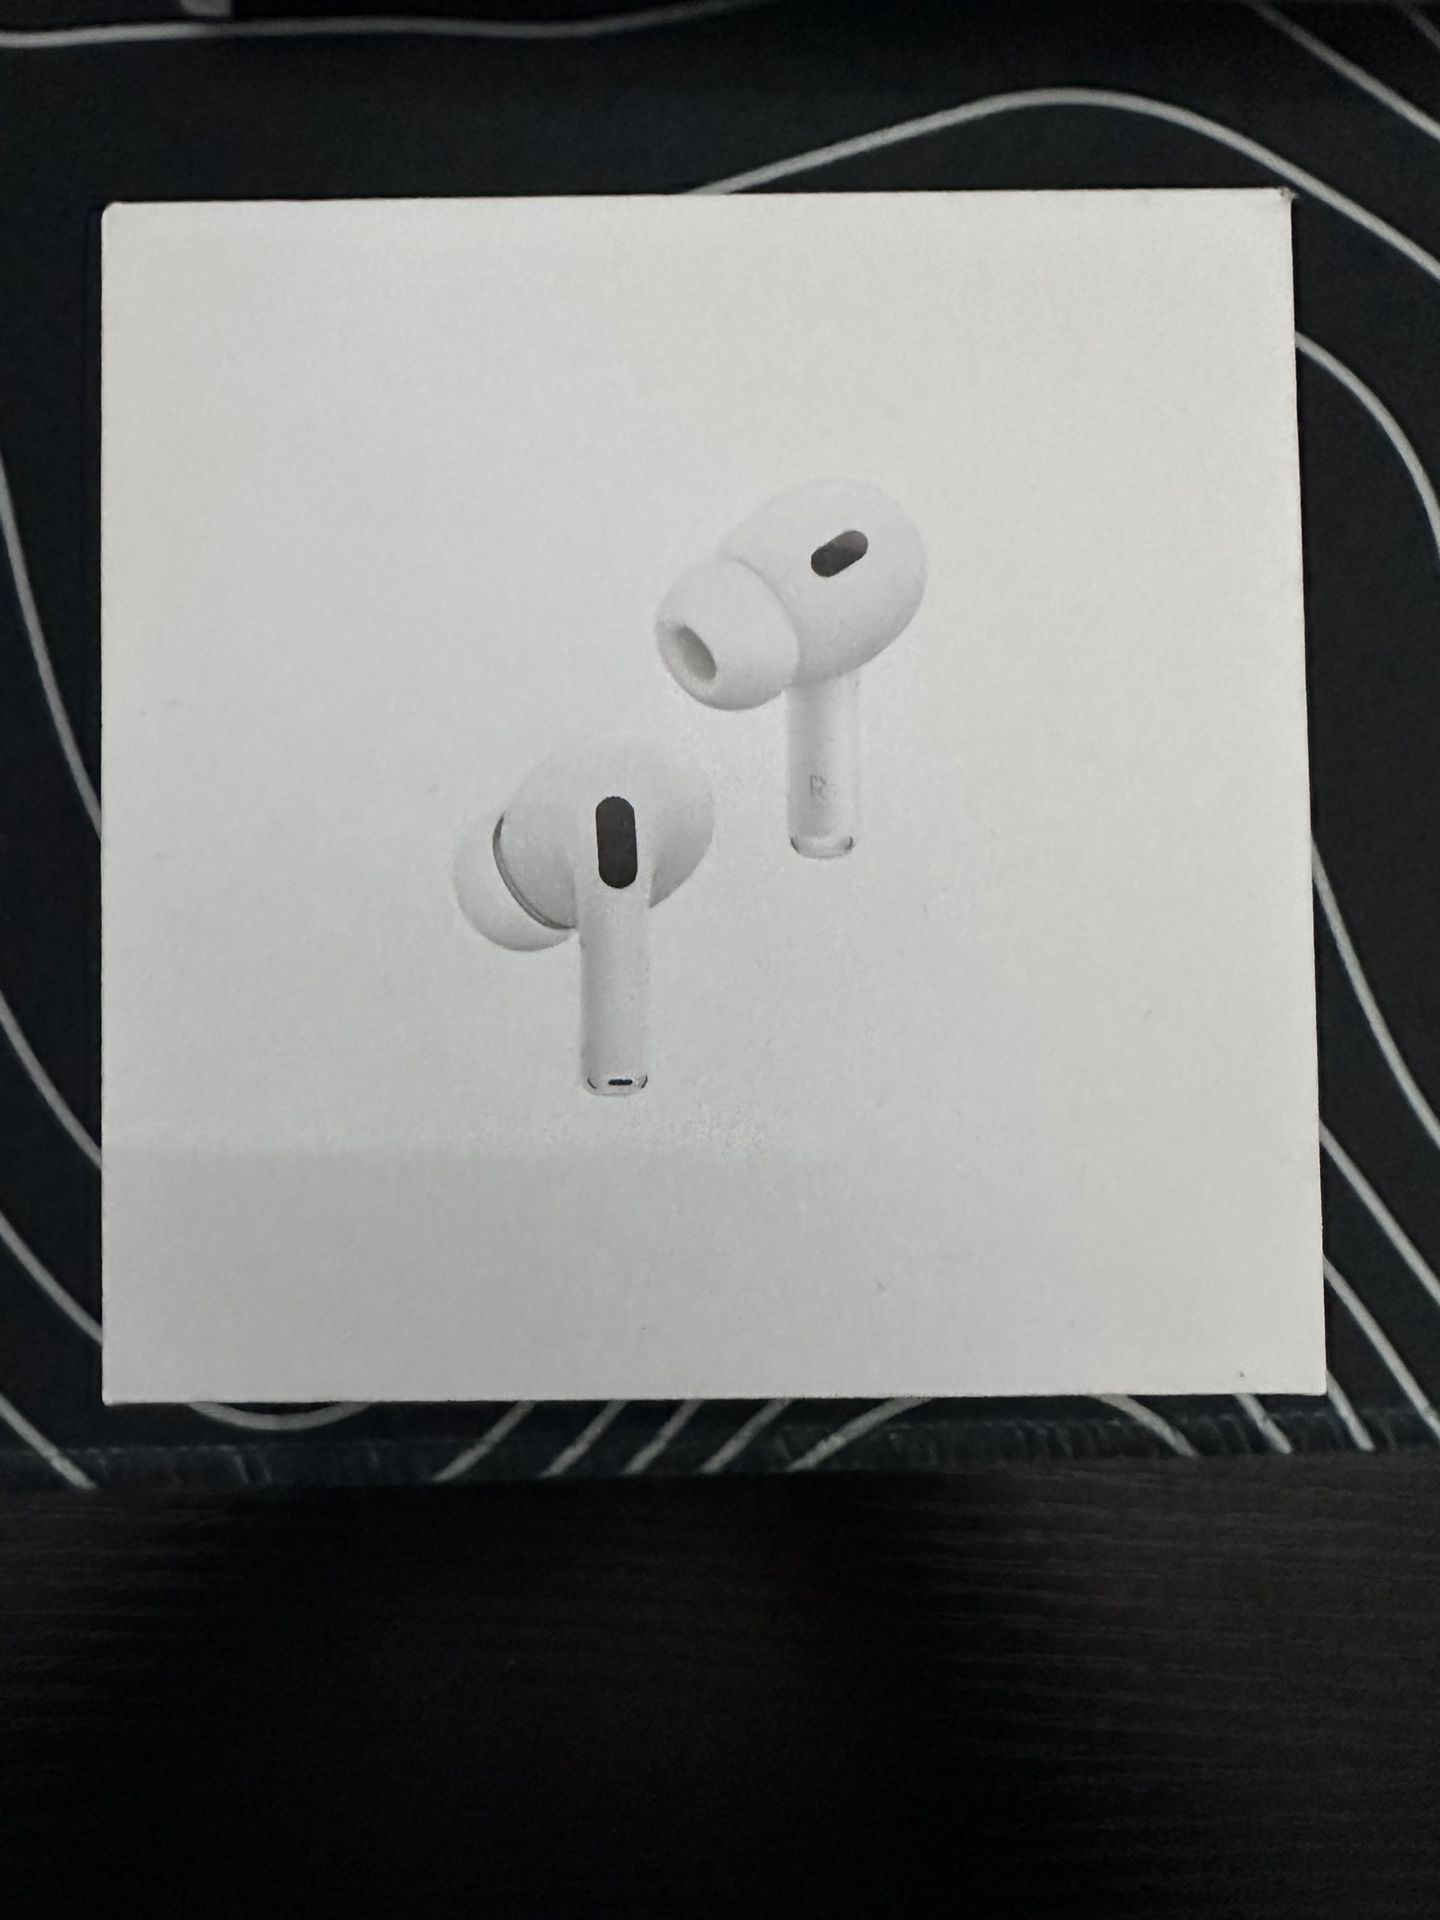 Apple airpods Pro (2nd generation)